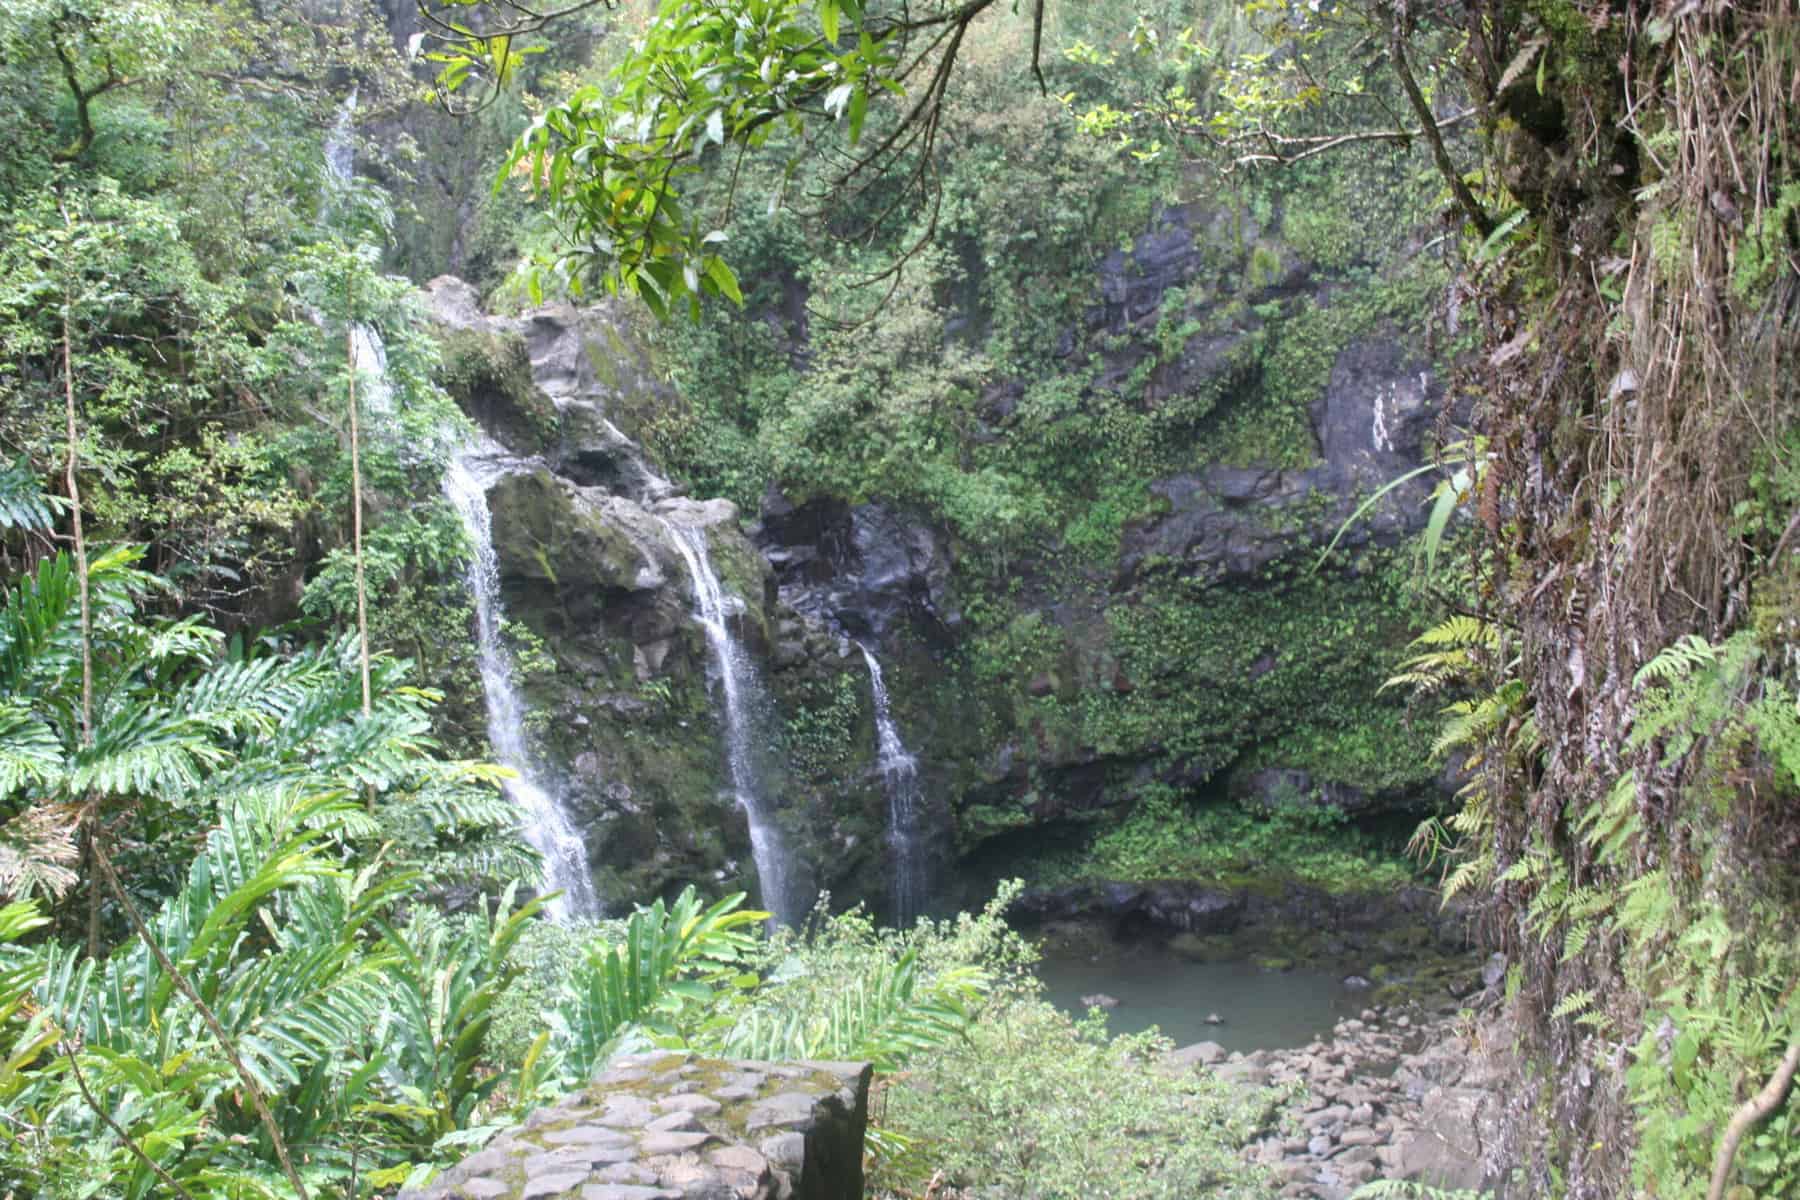 The Three Bears waterfall on the Road to Hana. It can be easily seen from the Hwy. There are three waterfalls, a big one, a medium one and a small waterfall.